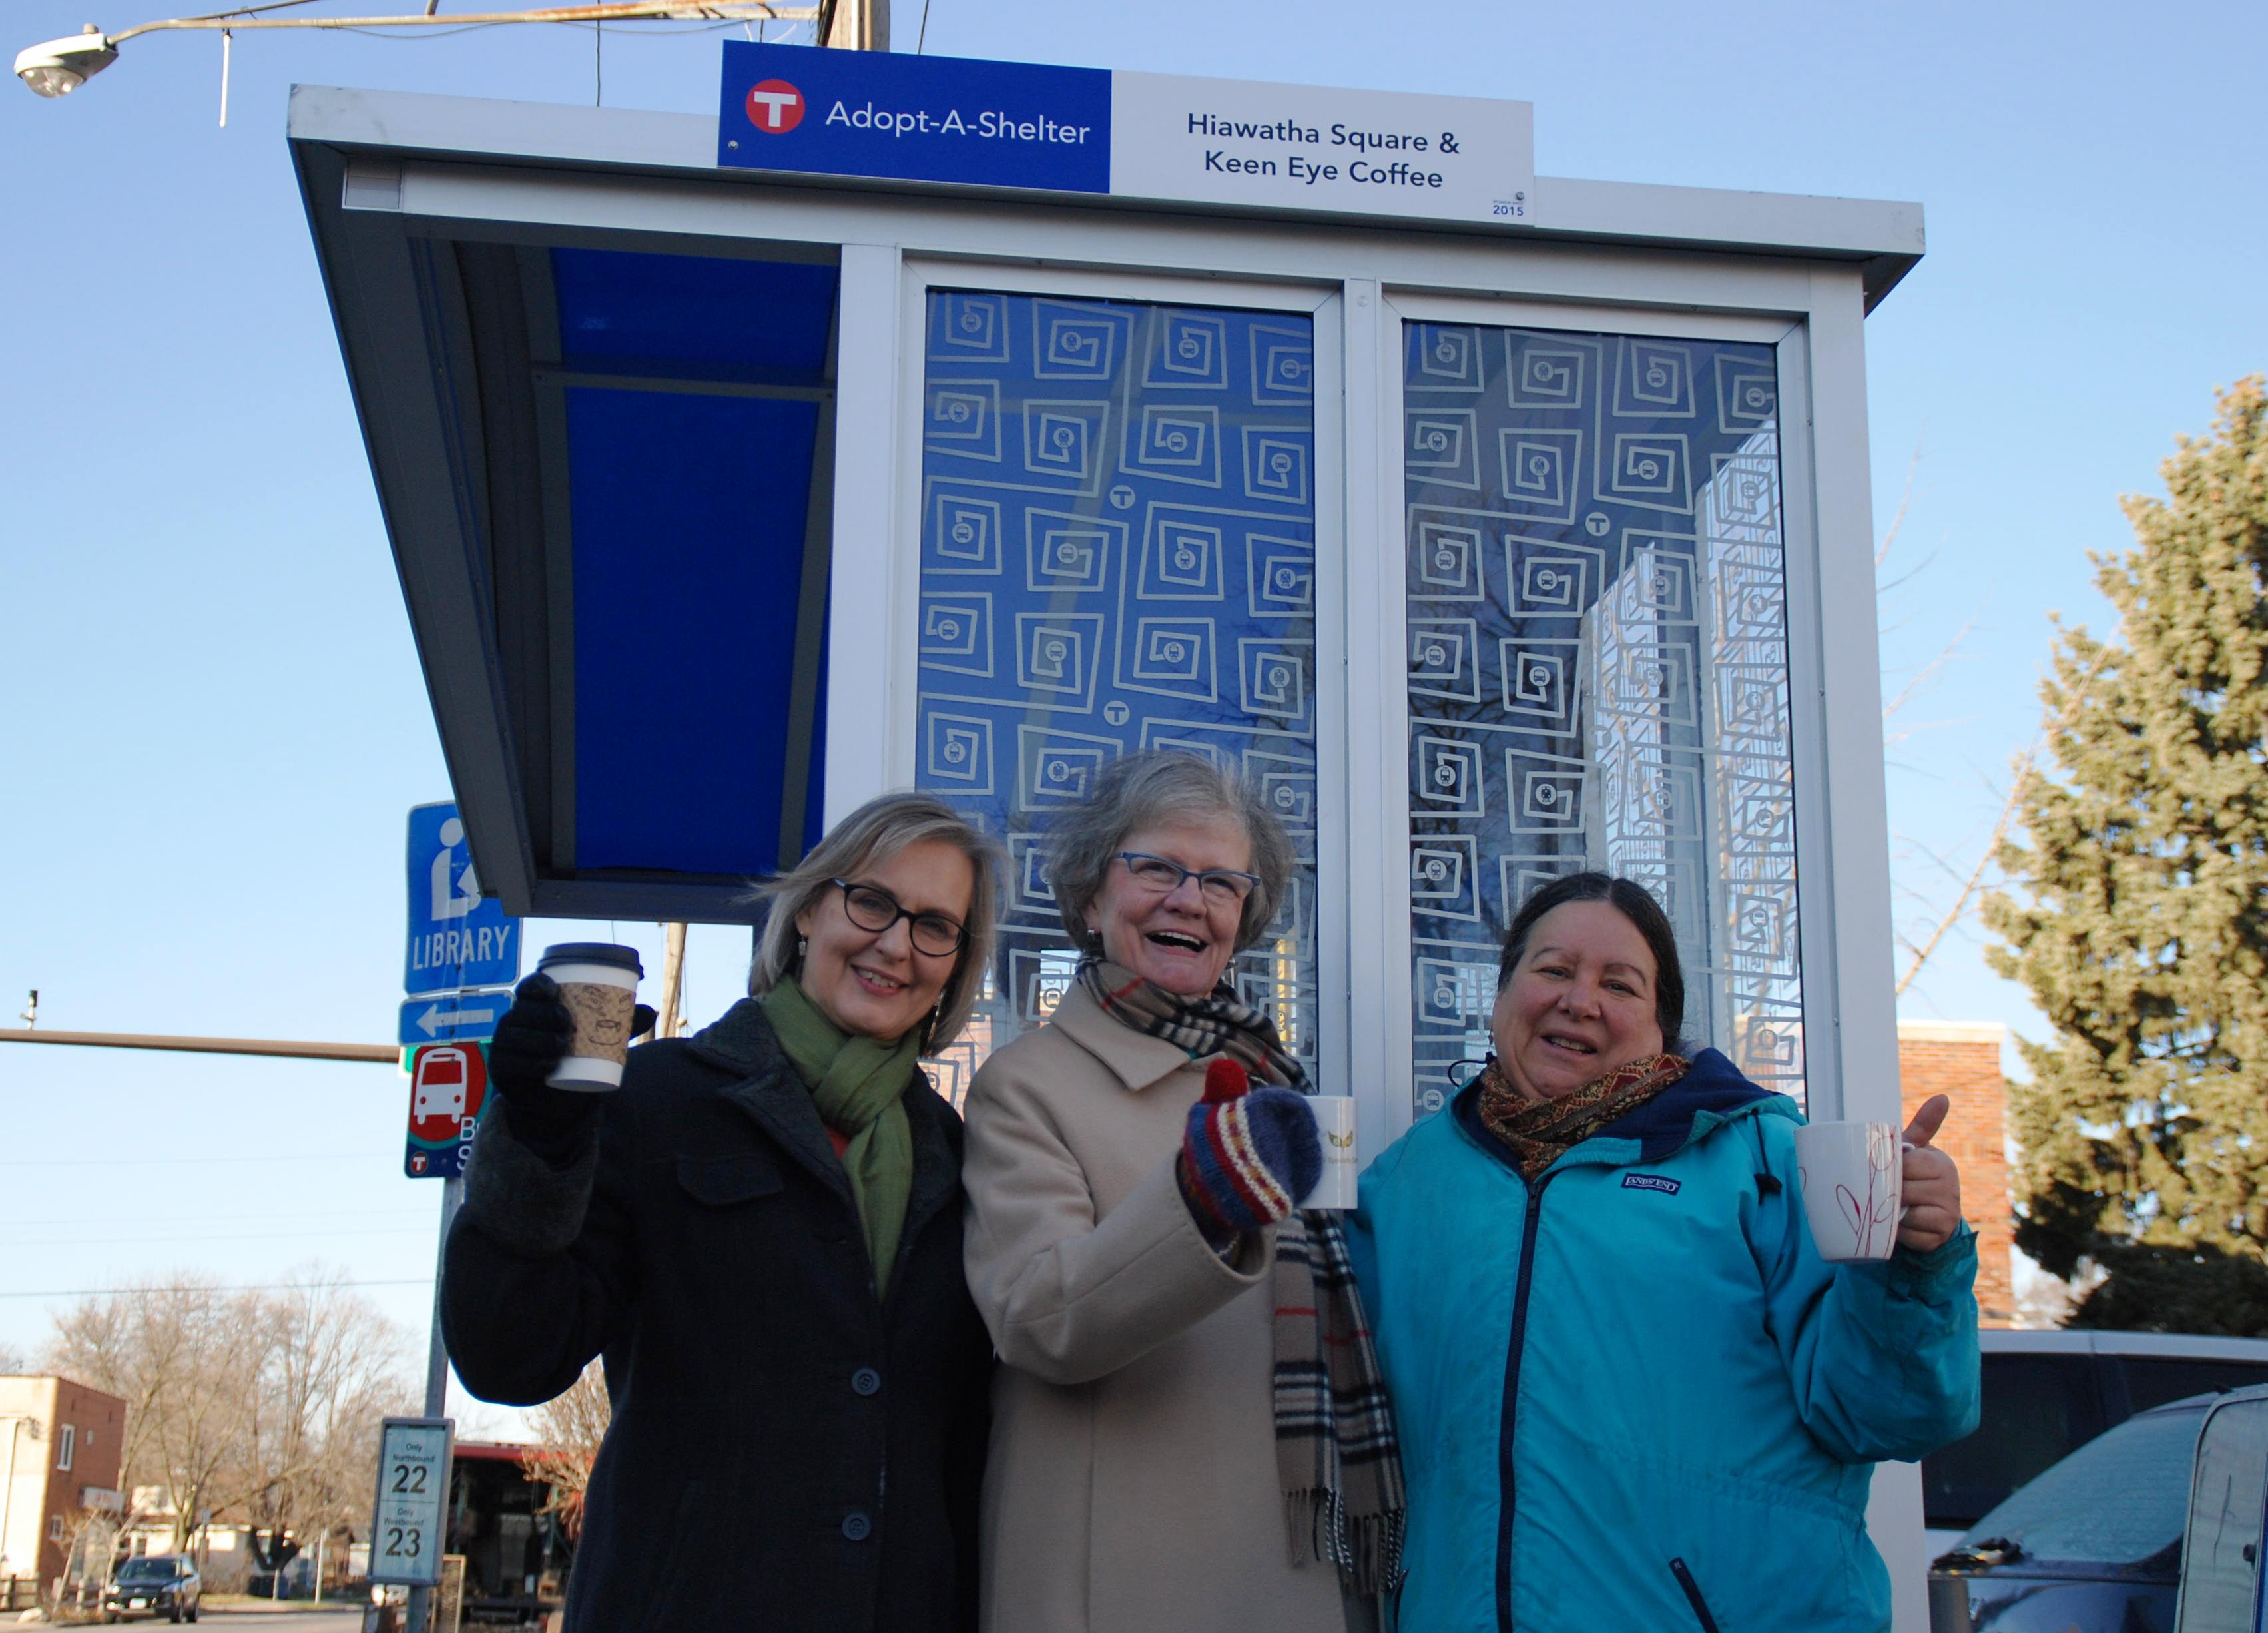 Ann Erickson, owner of Keen Eye Coffee, Doris Overby, a neighborhood block leader, and Francy Scurato, also a neighborhood block leader, with the shelter they adopted at the corner of East 38th Street and South 28th Avenue. 